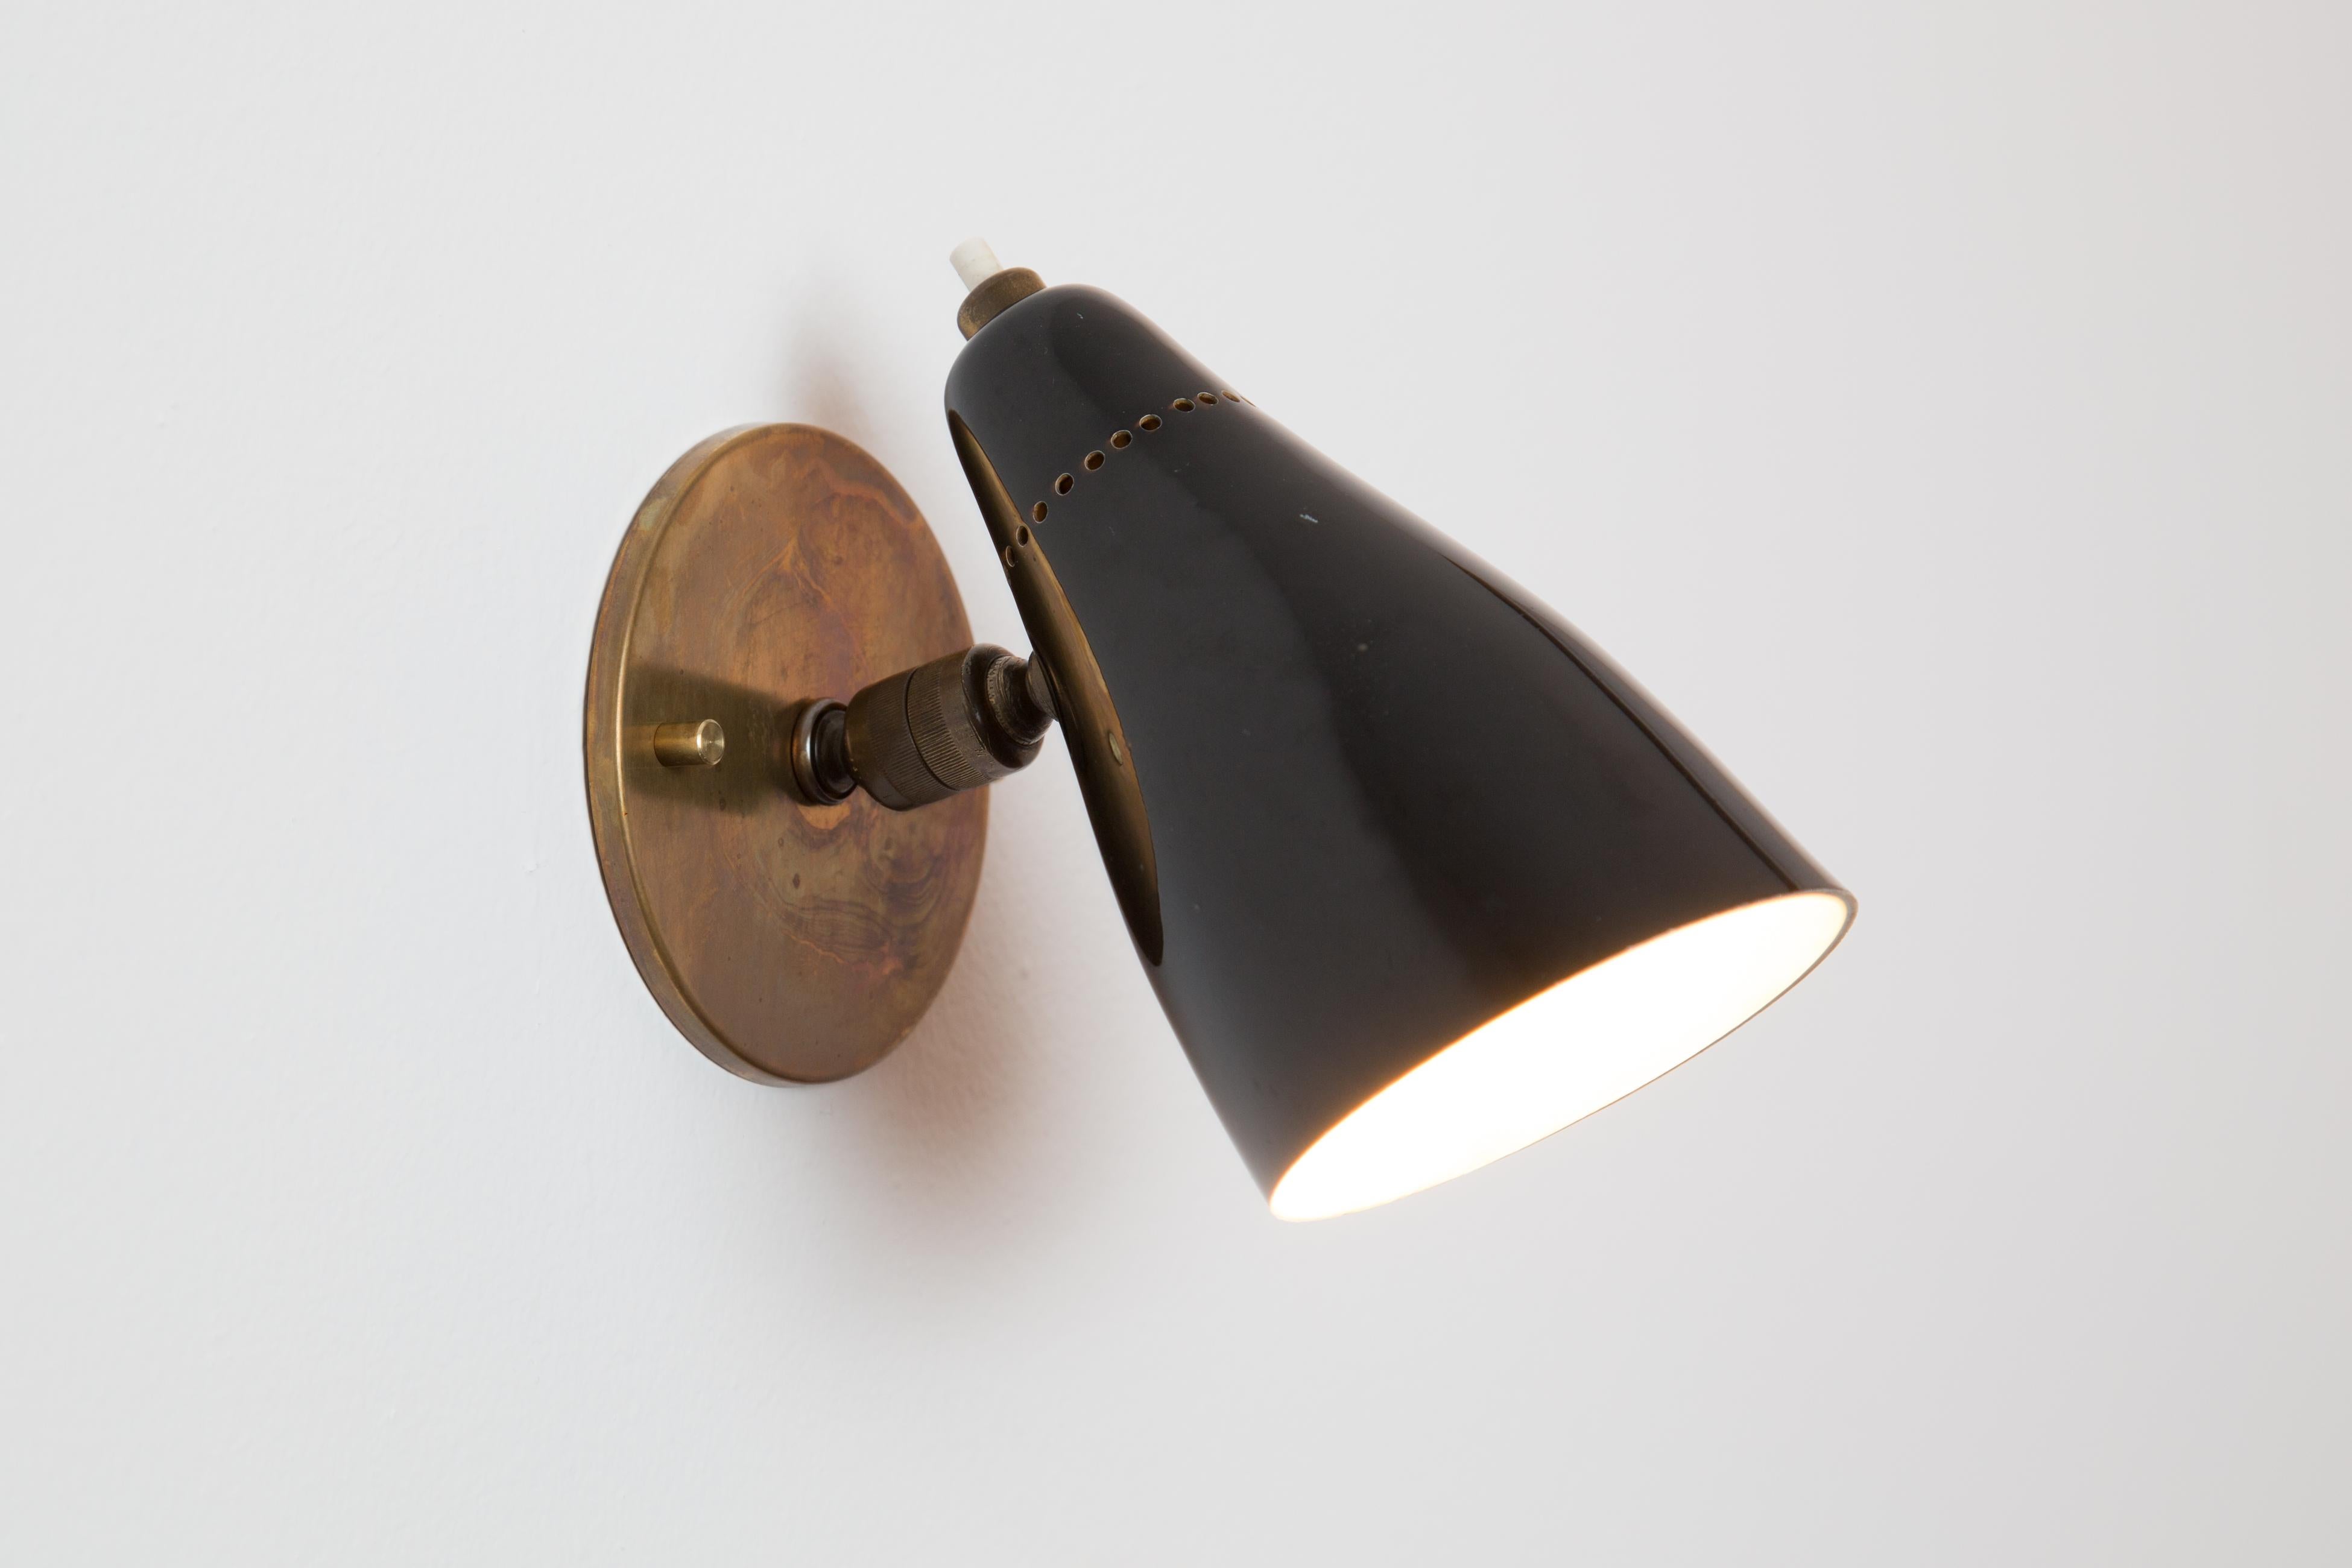 Pair of 1950s Giuseppe Ostuni Model #101 Black Articulating Sconces for O-Luce. Executed in patinated brass and black painted perforated aluminum shade. Sconces pivot up/down and left/right. An incredibly clean and refined design by one of the